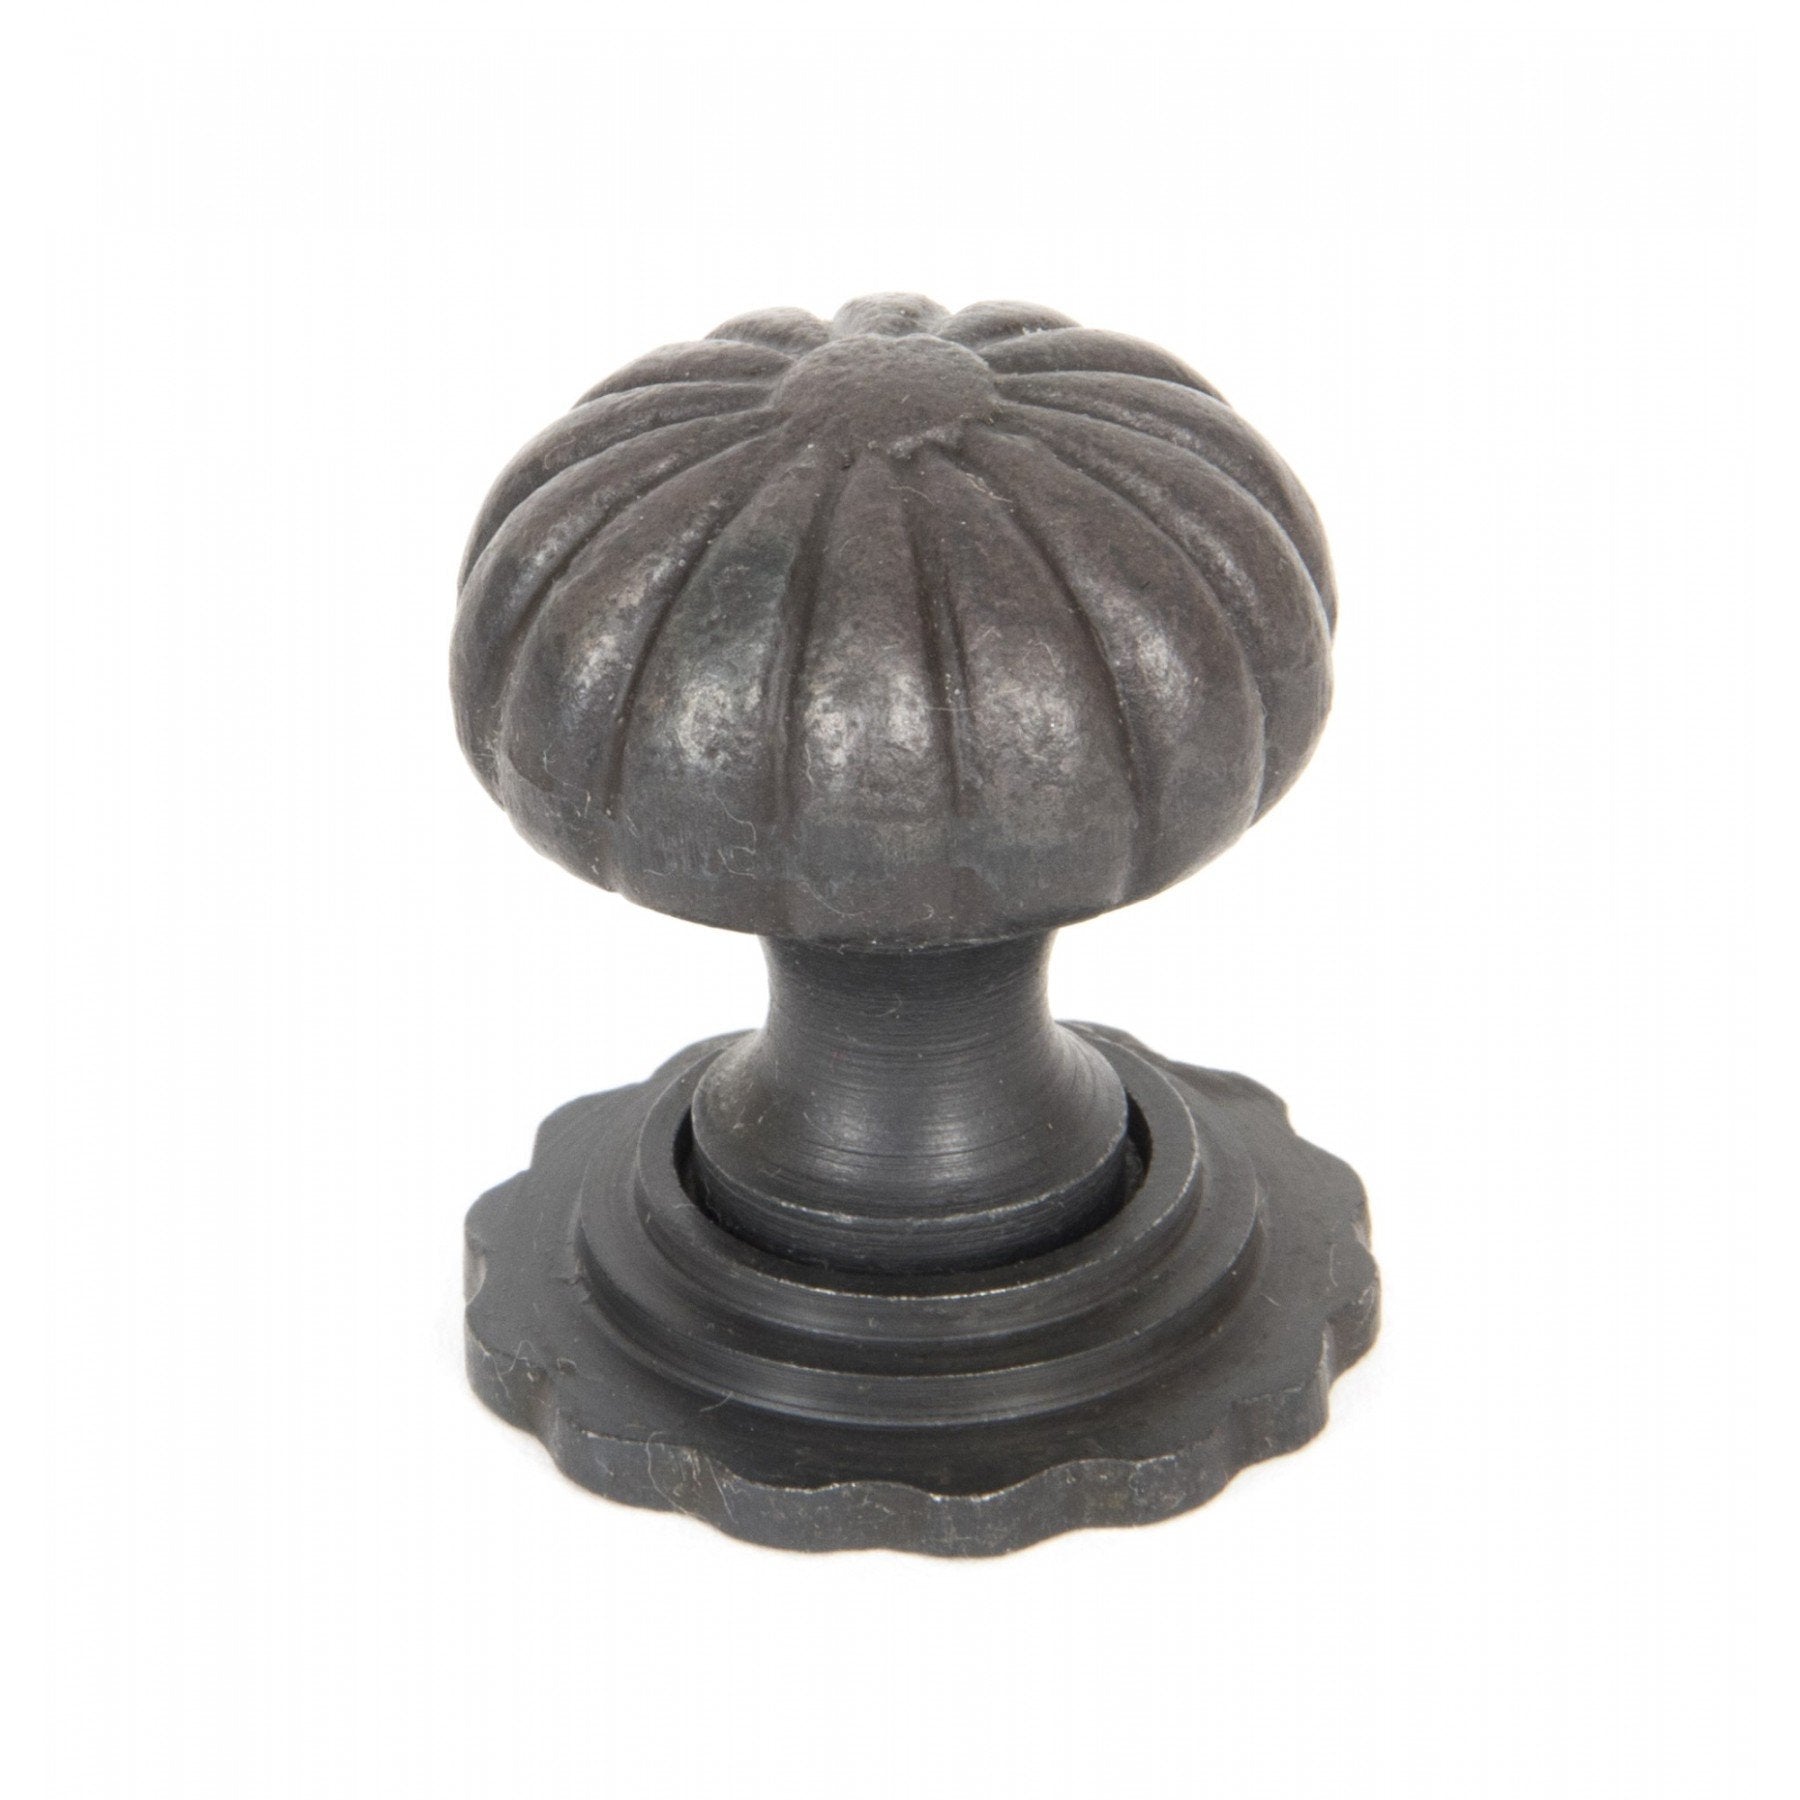 Beeswax Cabinet Knob with Base - Small - No.42 Interiors